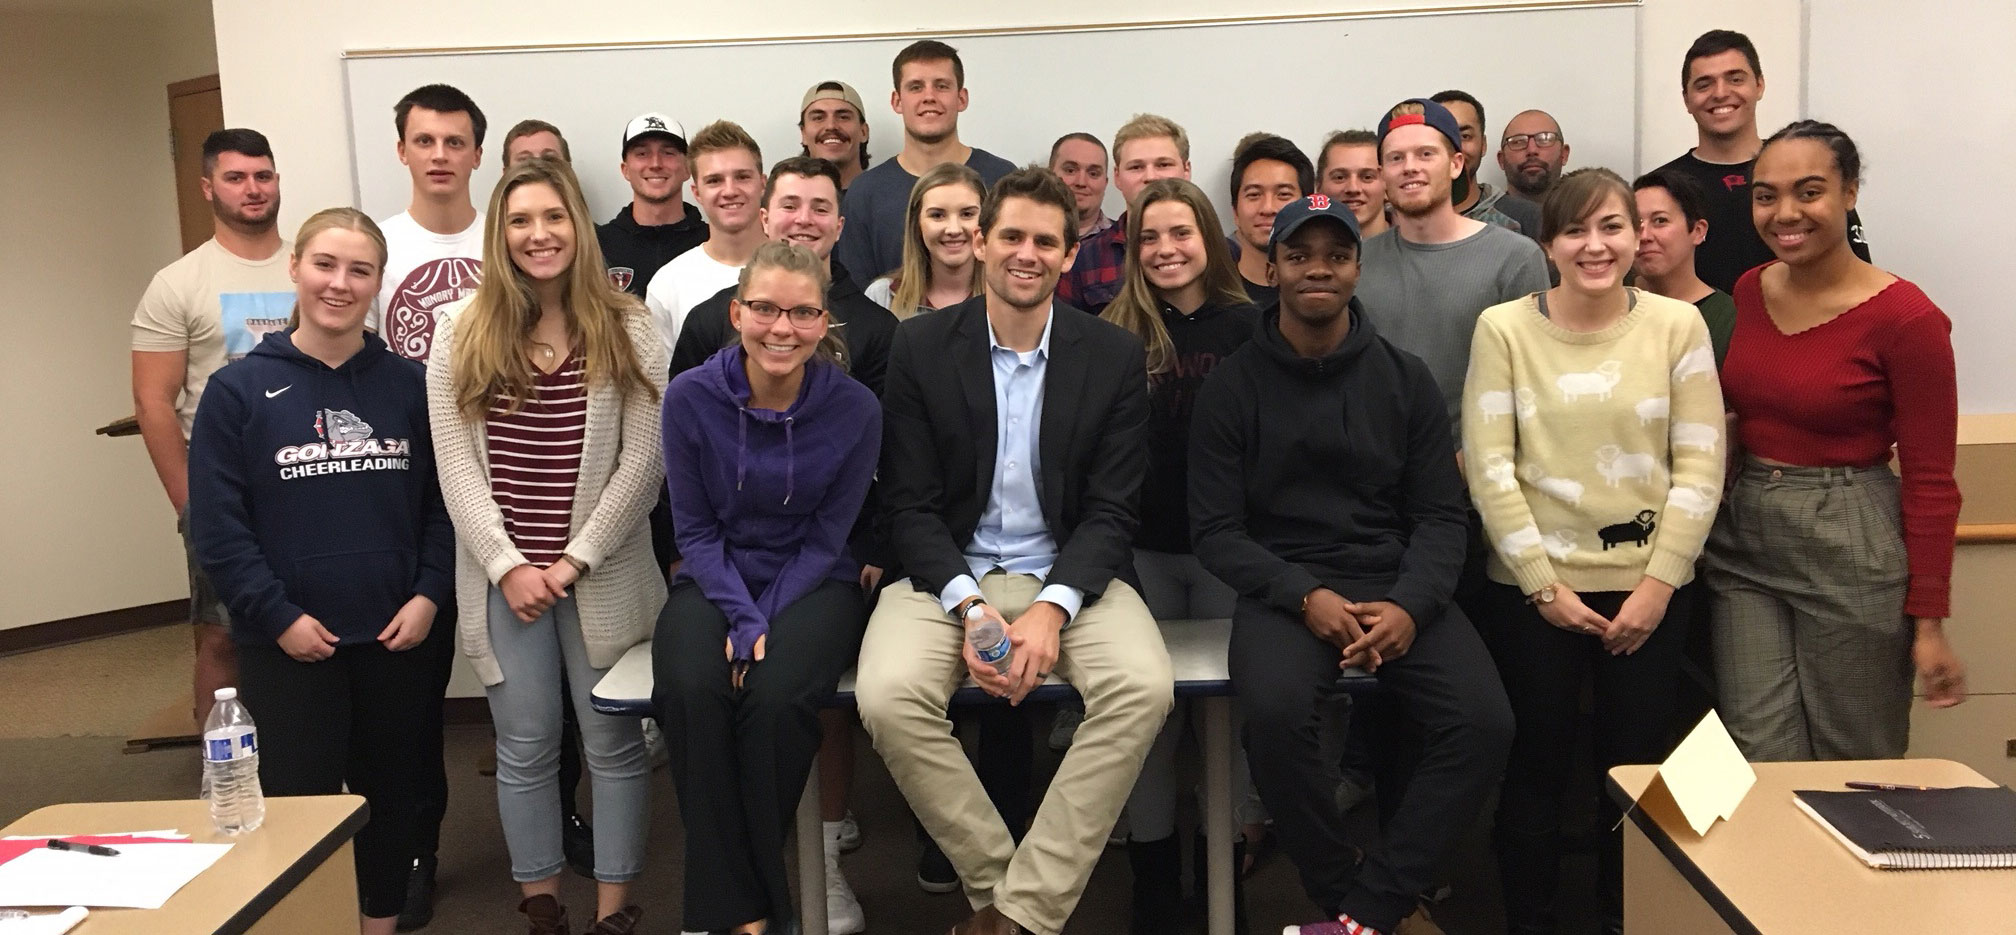 Scott Donnell poses with a group of Whitworth business students.